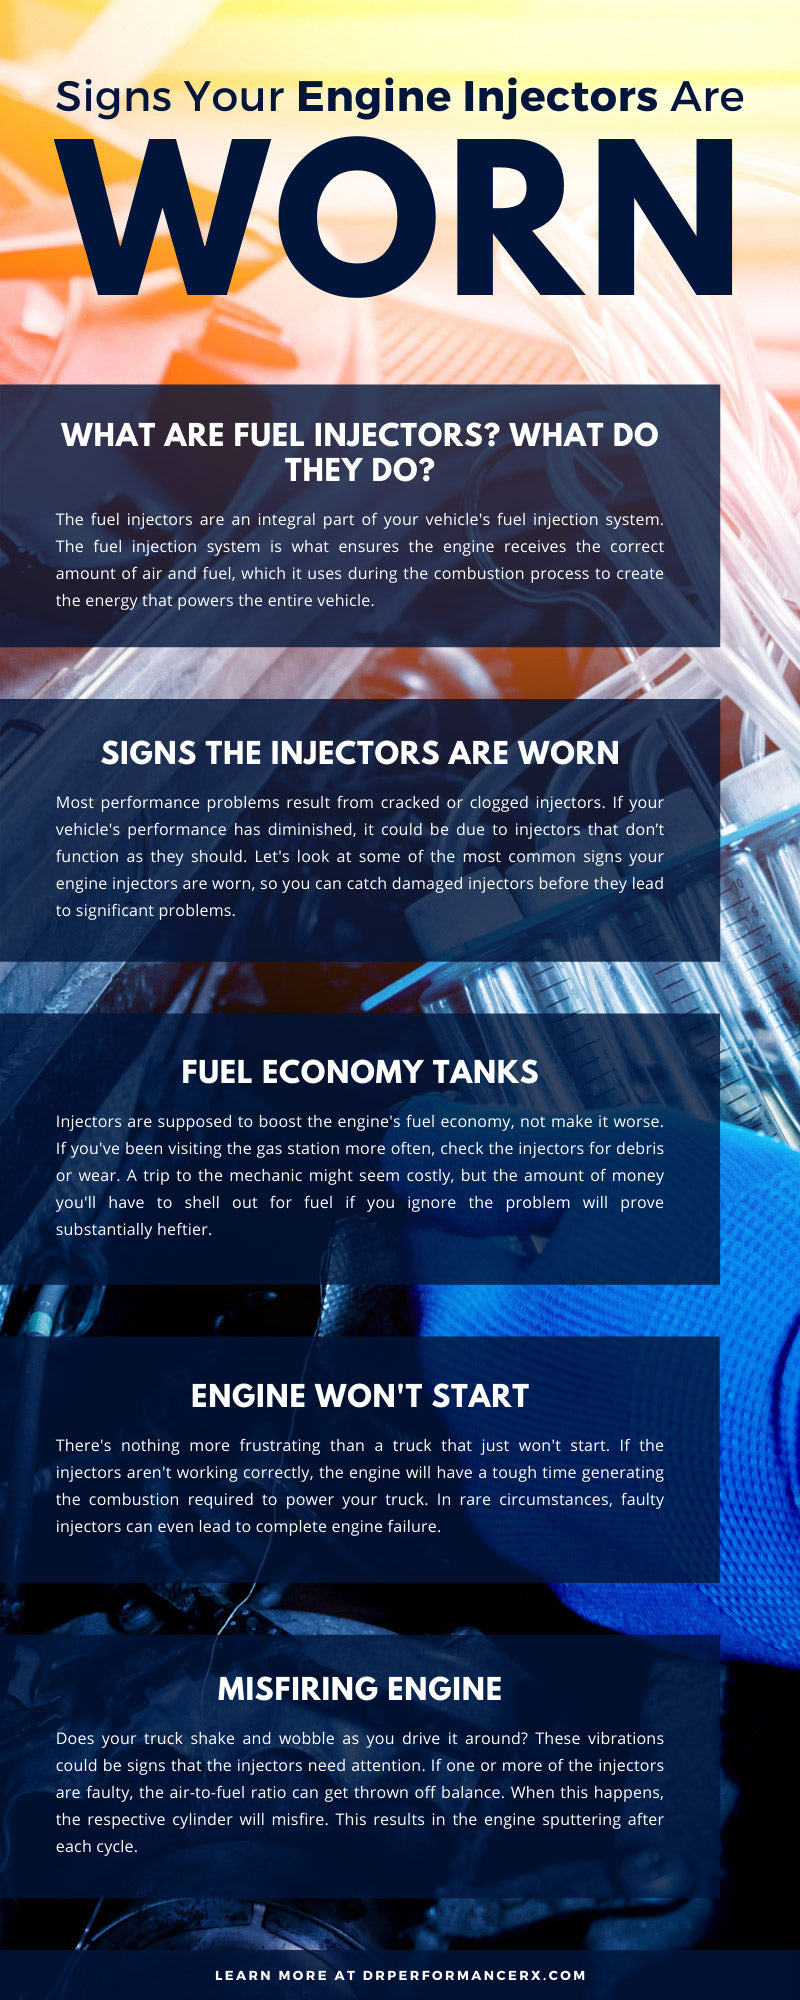 Signs Your Engine Injectors Are Worn